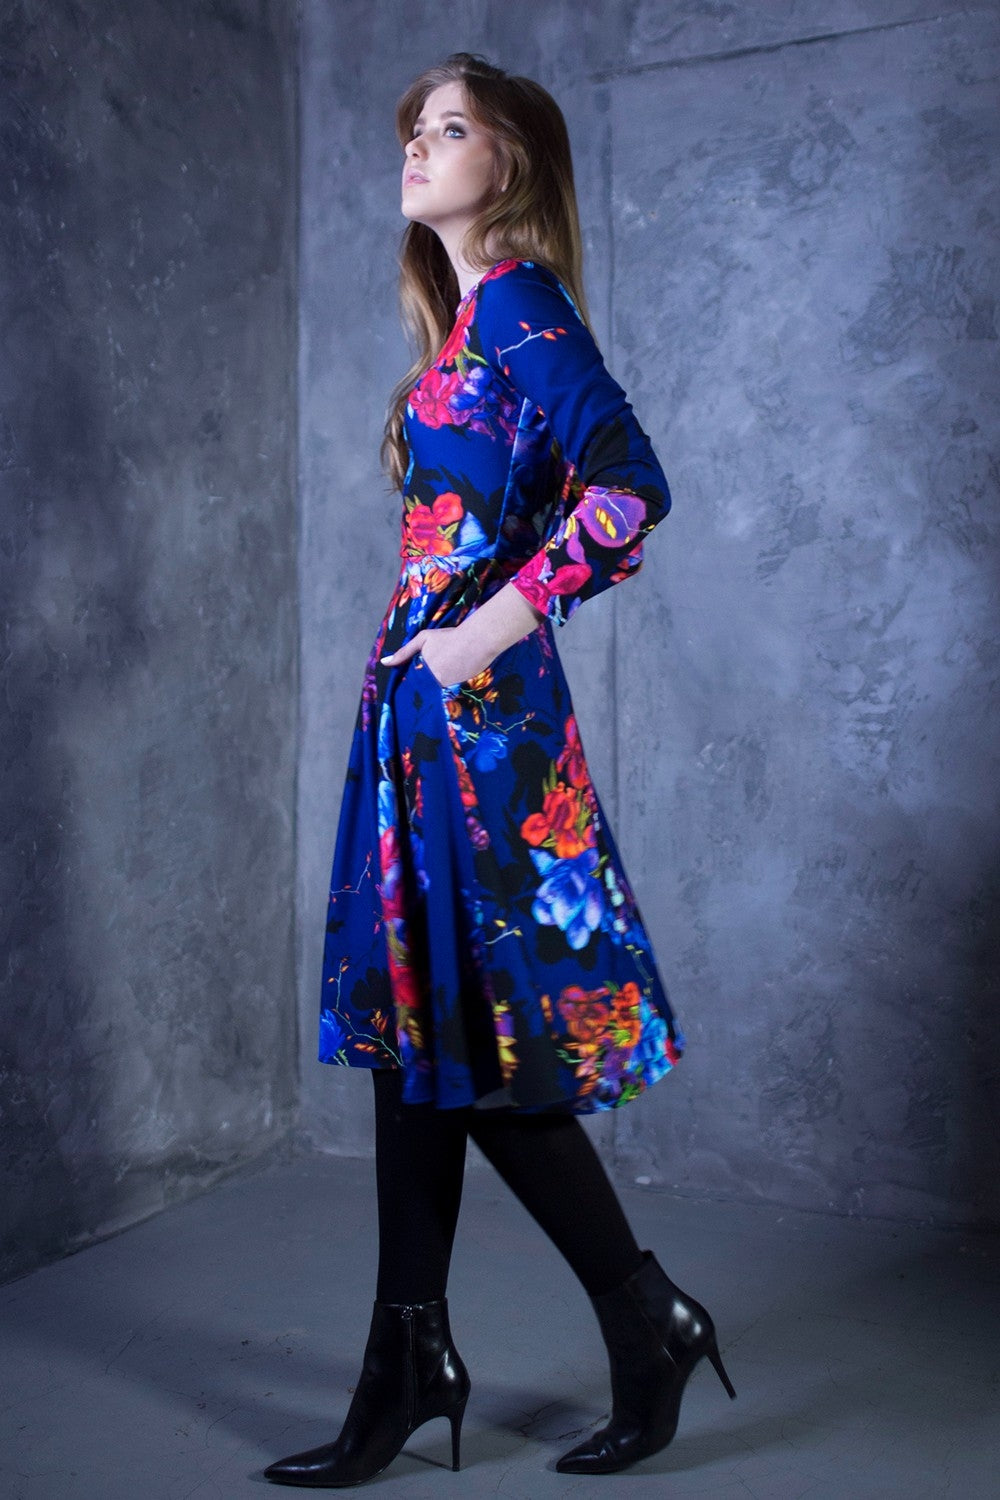 Dark blue full dress with painted flowers